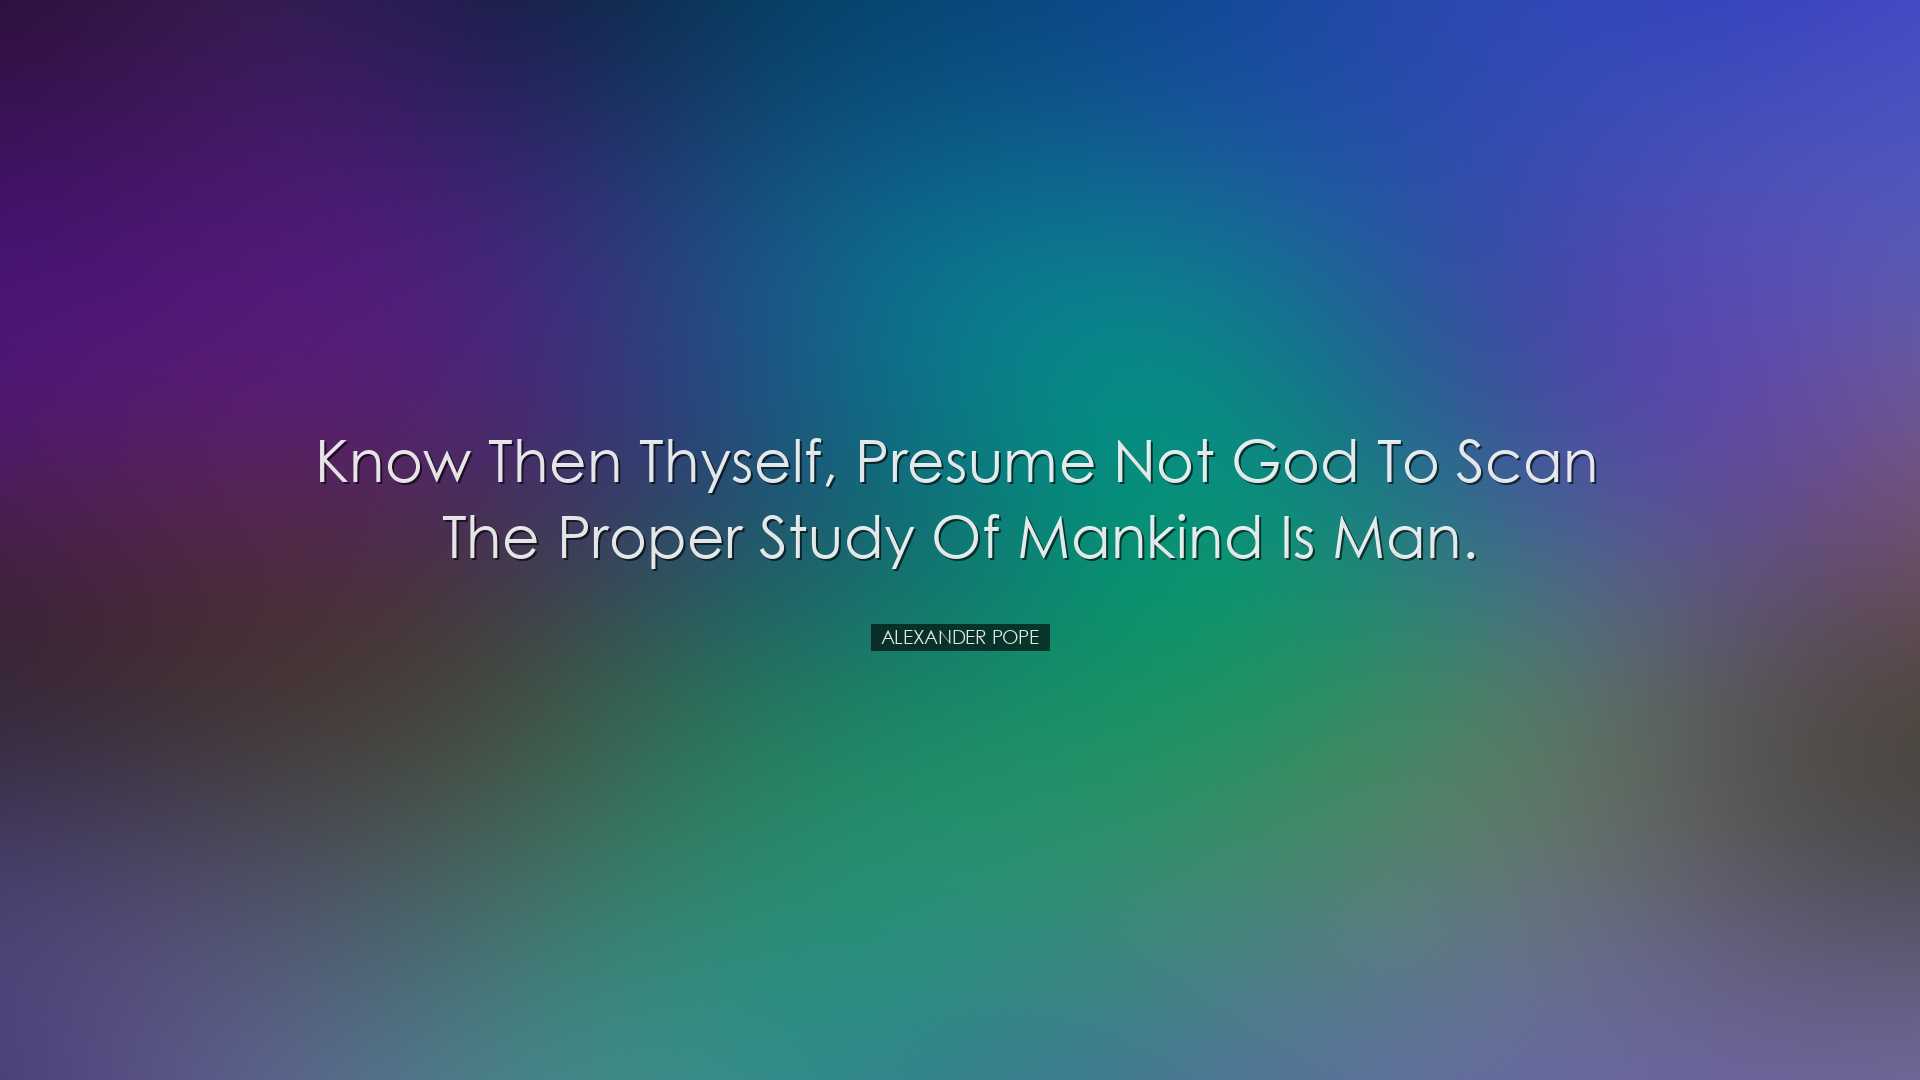 Know then thyself, presume not God to scan The proper study of man